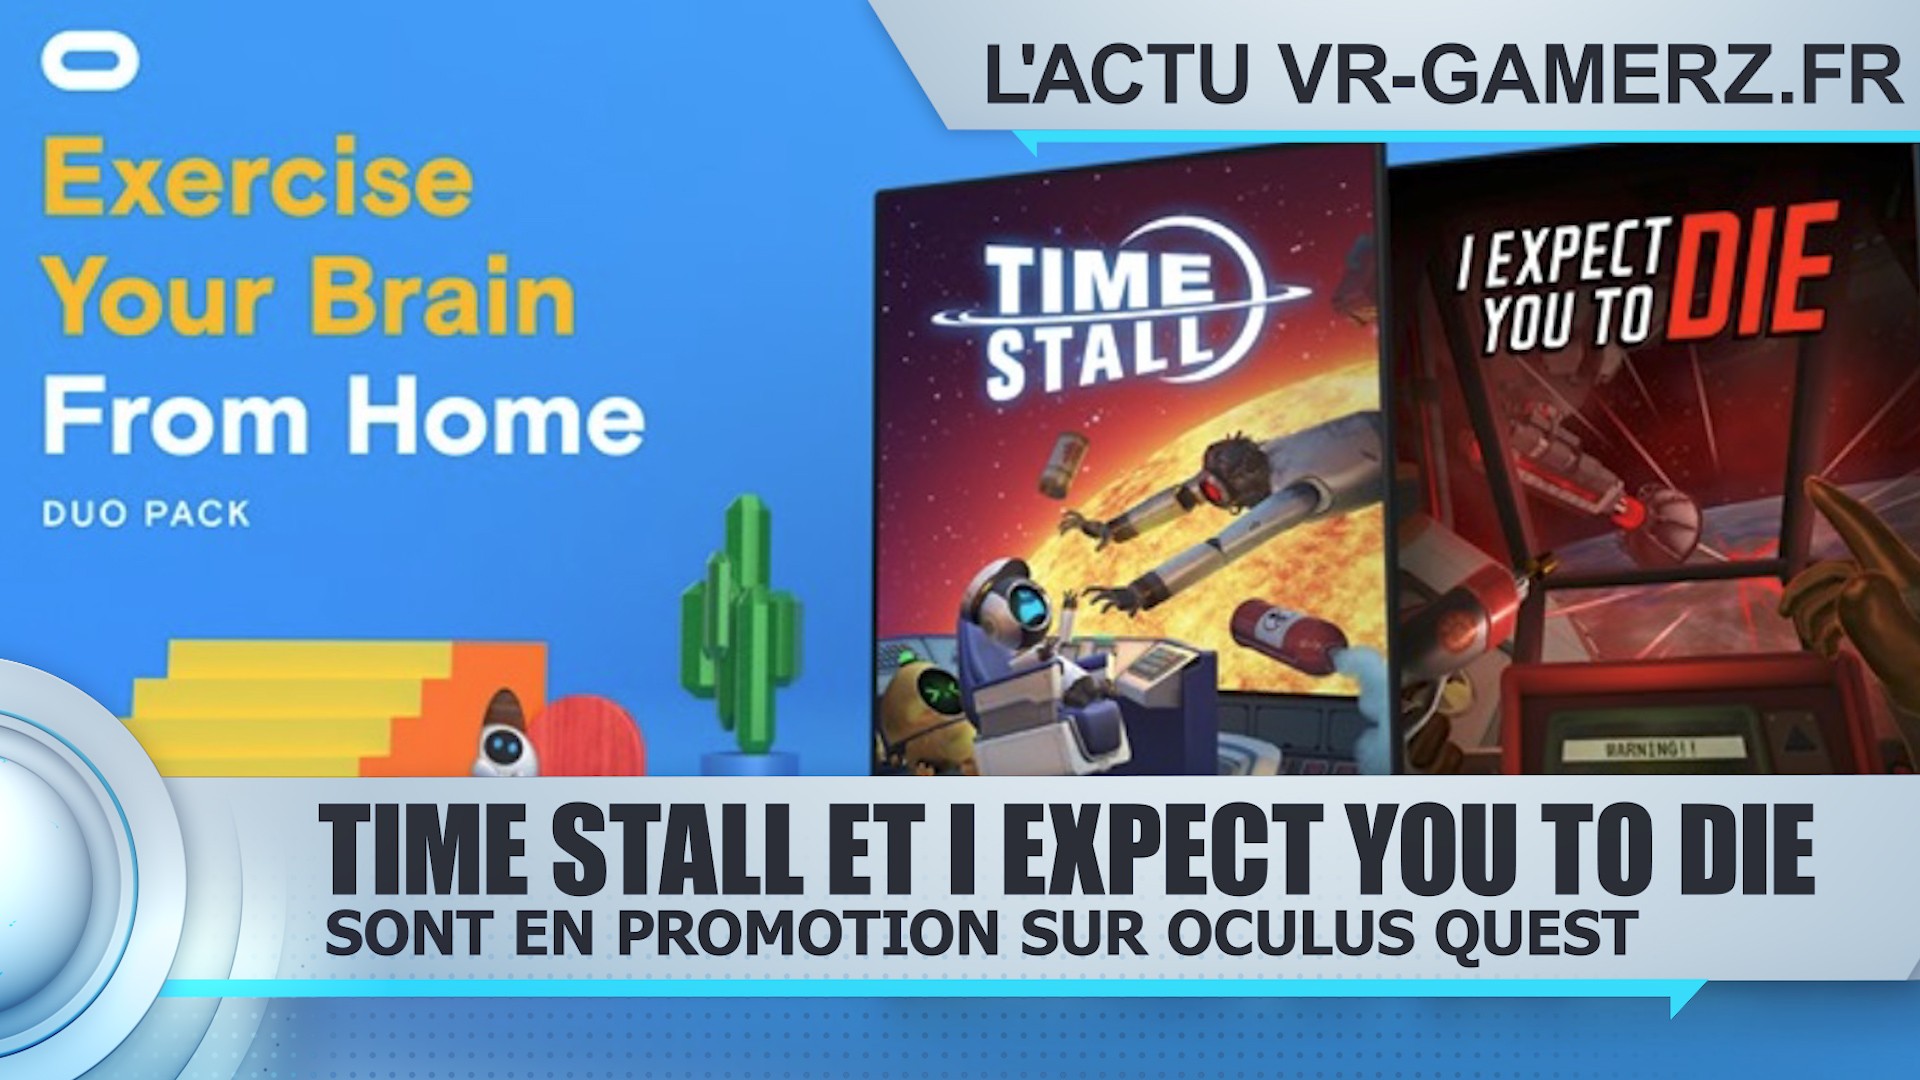 I expect you to die et time stall Oculus quest en promotion